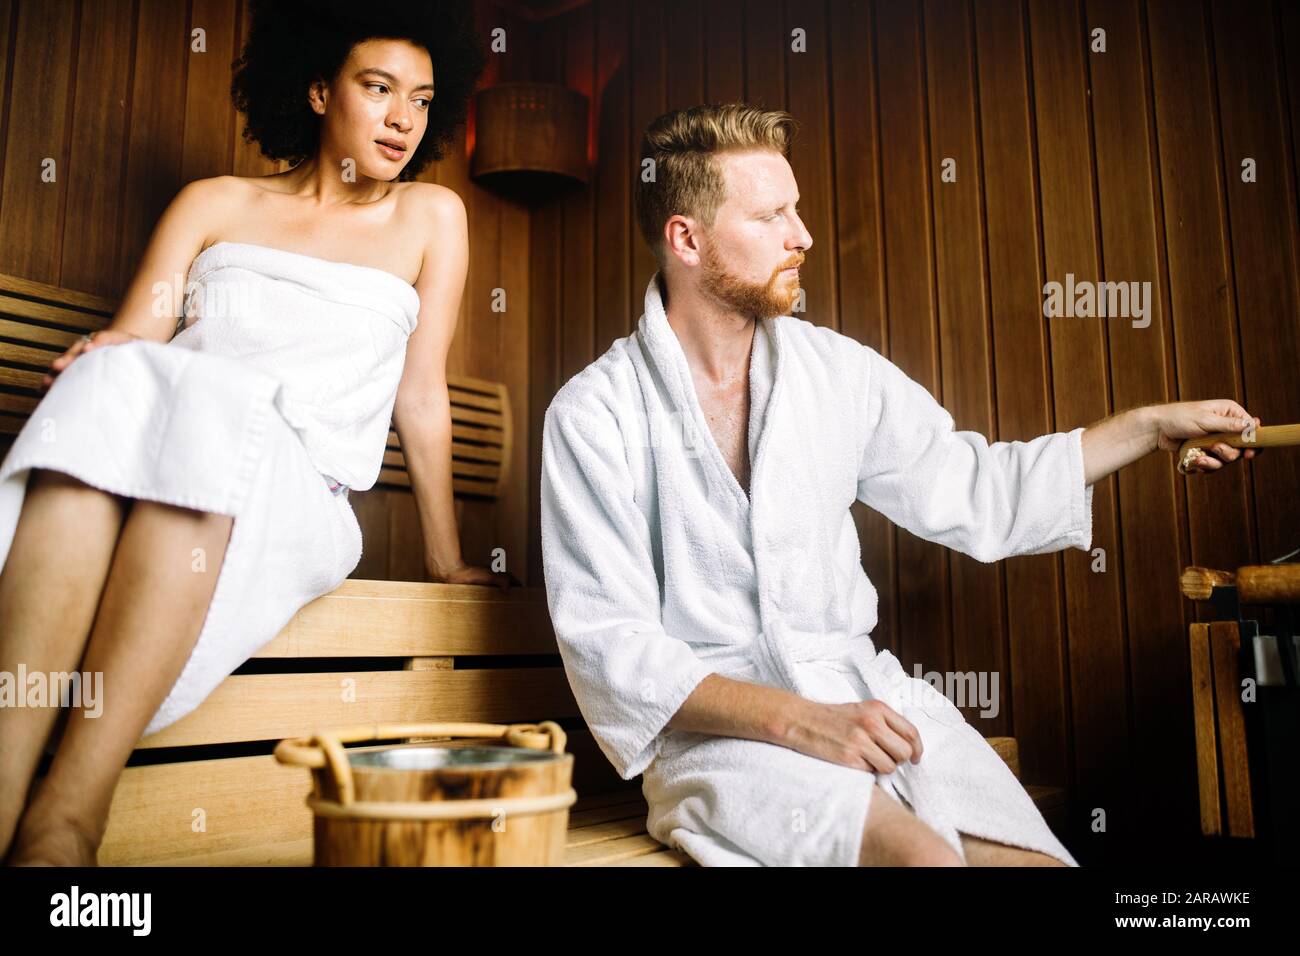 Finnish Women Sauna Hi Res Stock Photography And Images Alamy